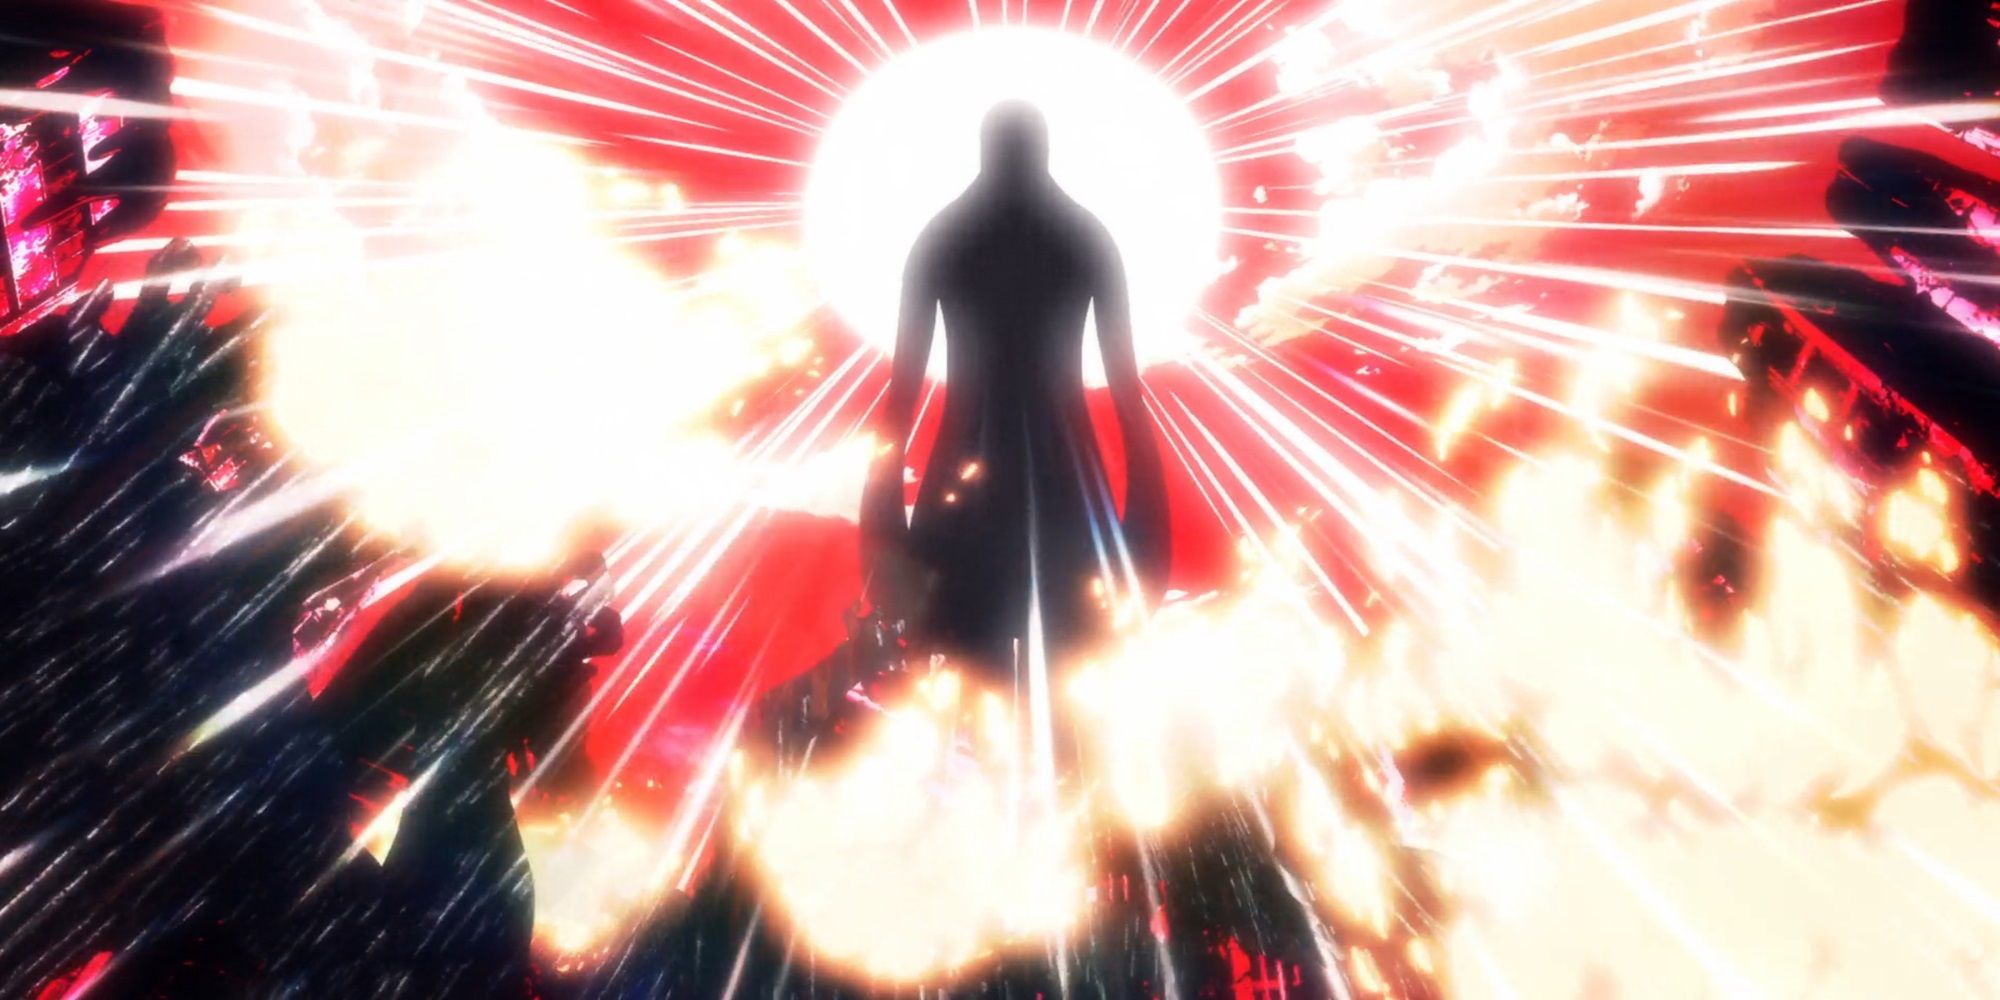 Undead Unluck Episode 15 introduces God with an explosive burst of energy.